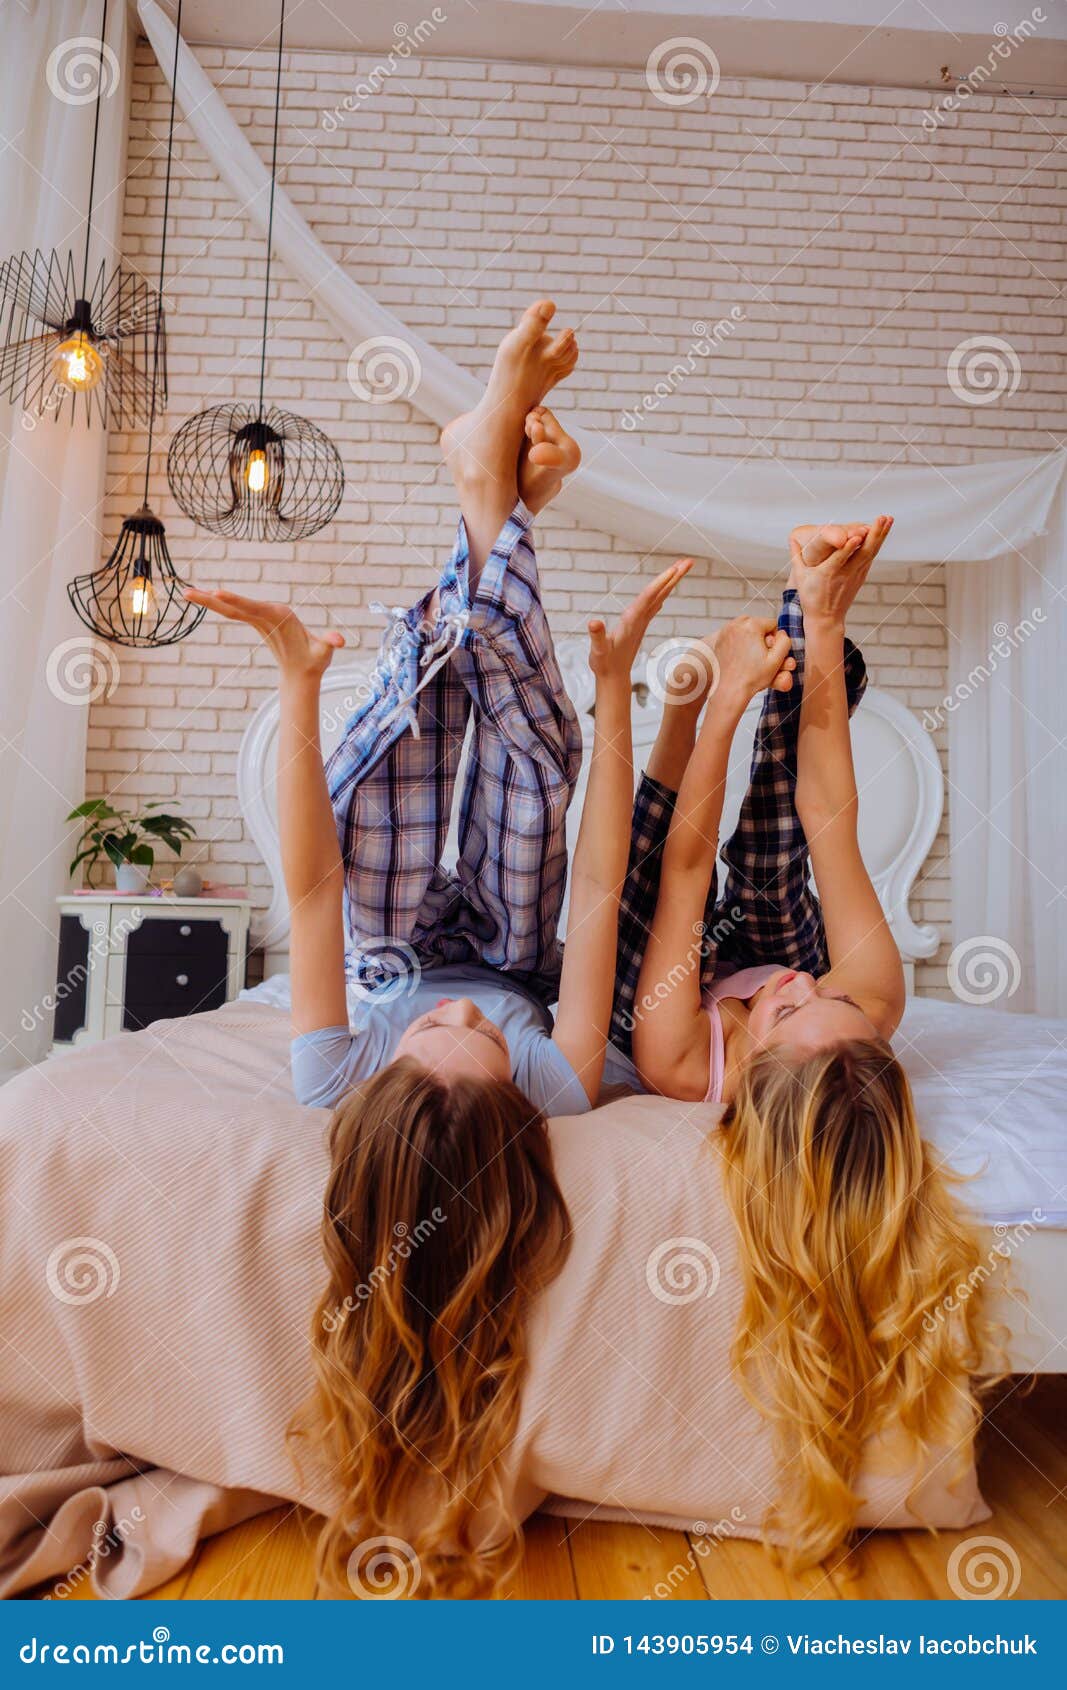 Sisters With Long Blonde Hair Raising Their Legs While Stretching In